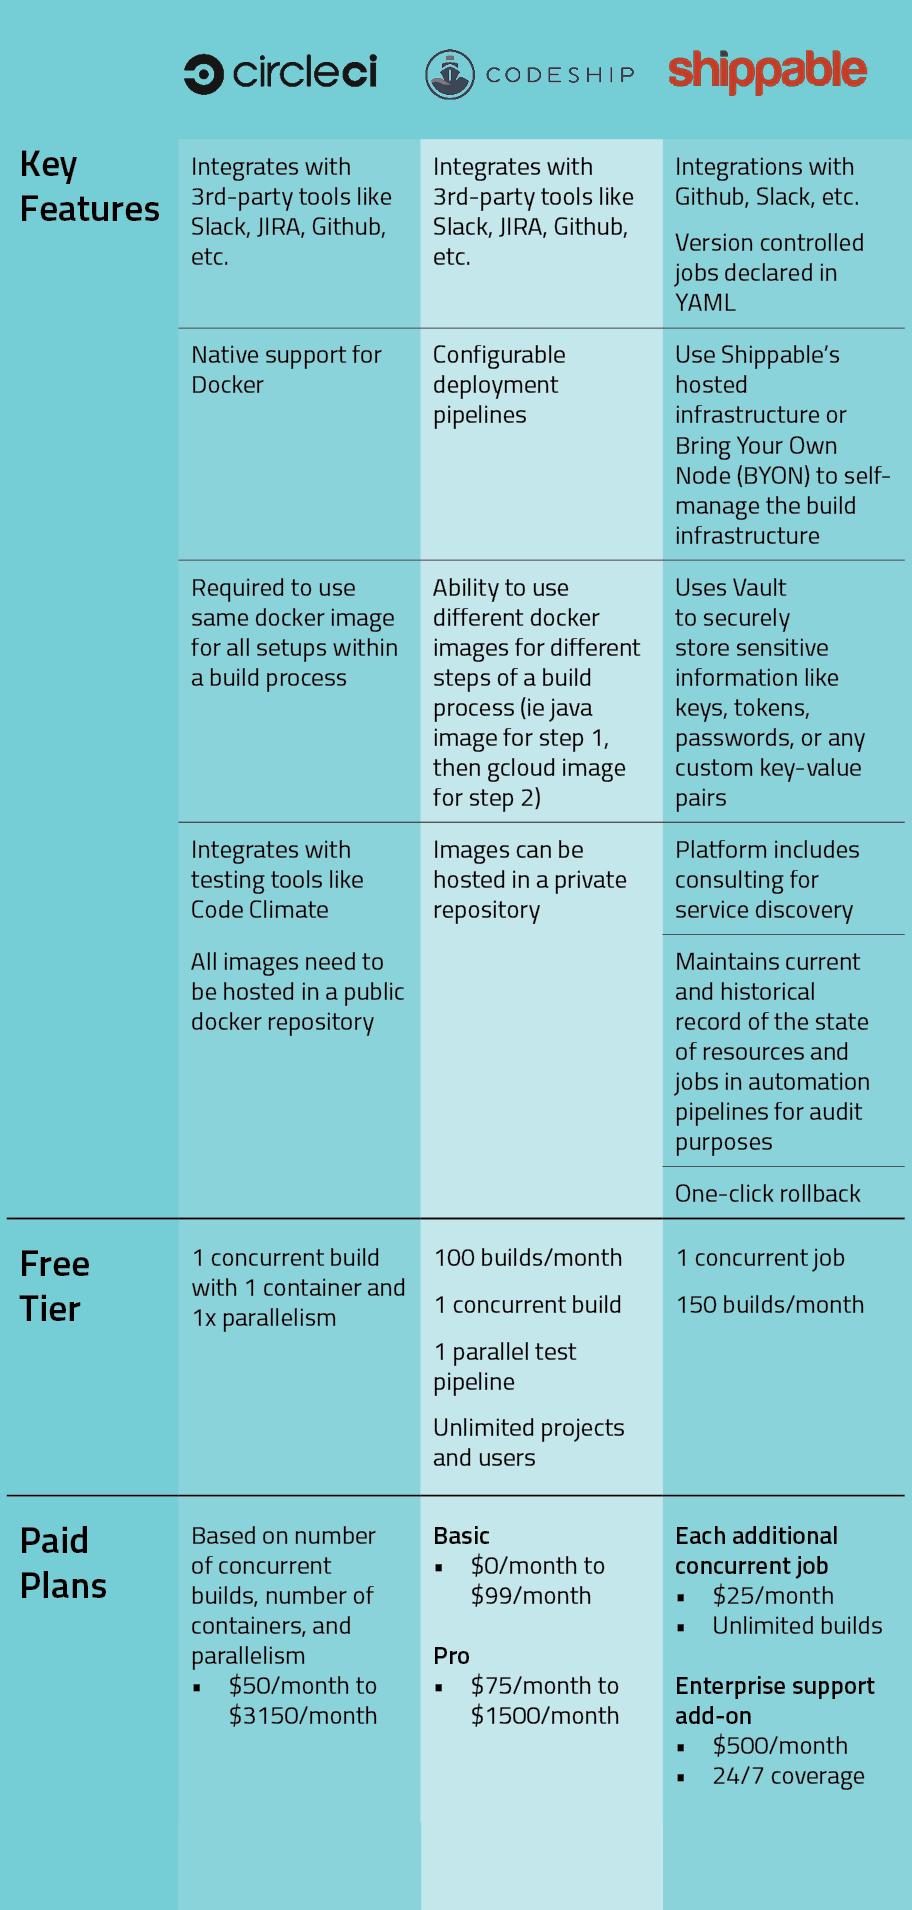 An infographic comparing key features, free tier and paid plans of circle ci, code ship and shippable.